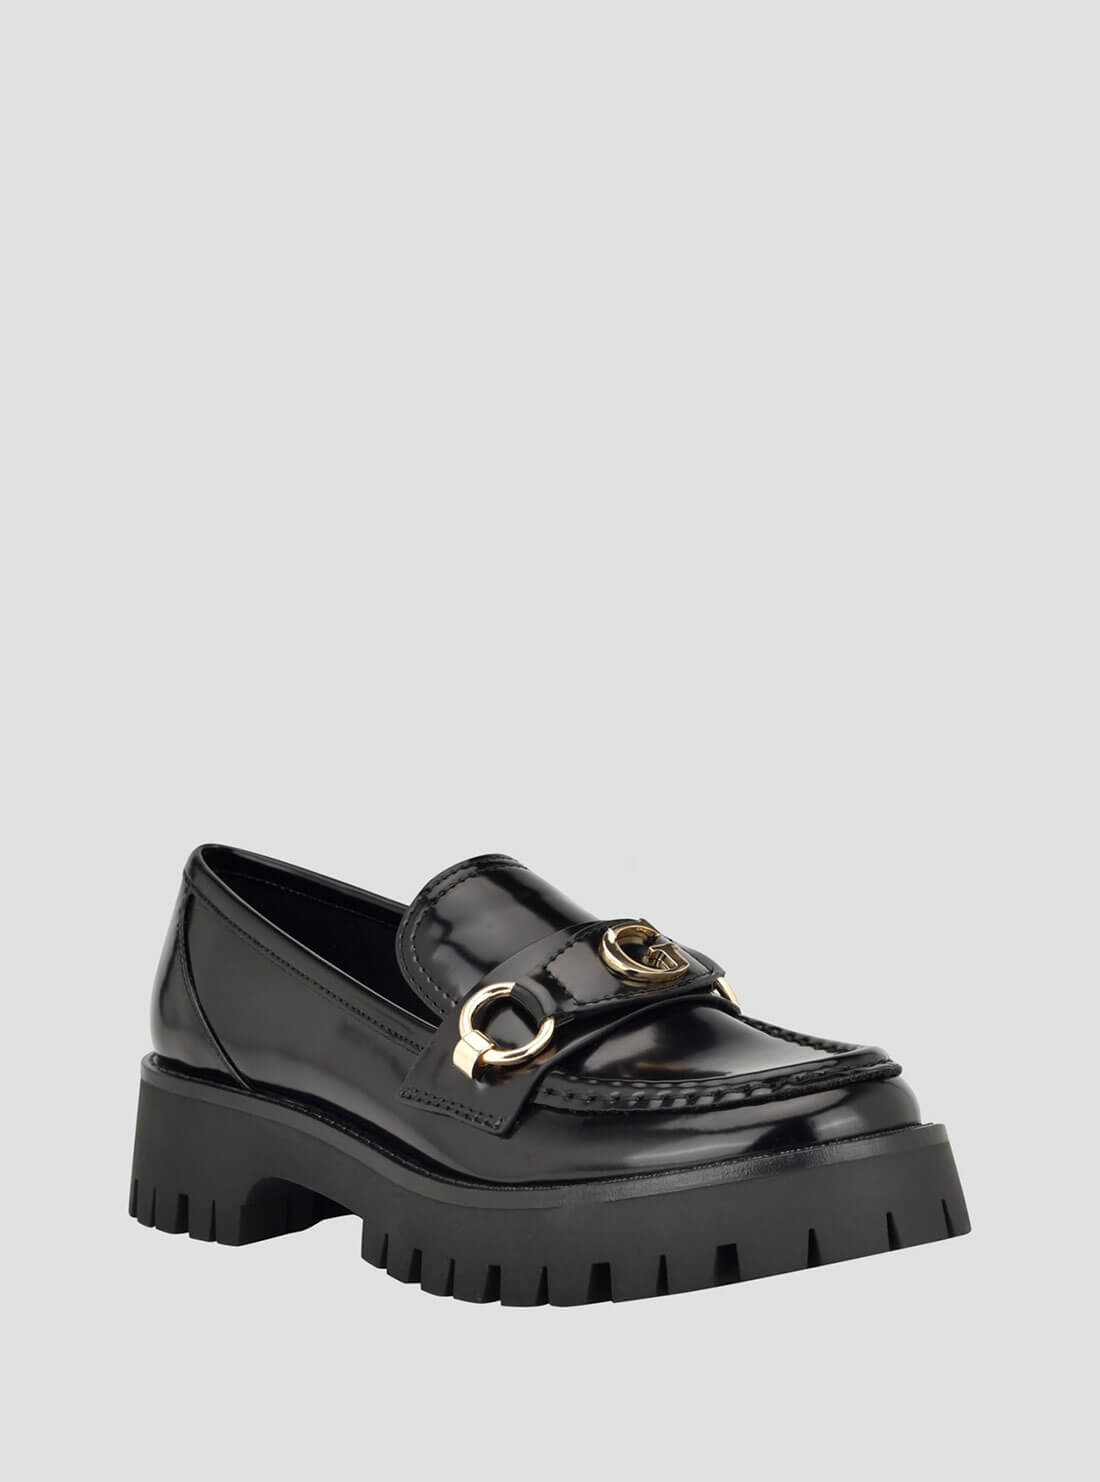 Black Almost Loafers | GUESS Women's Shoes | front view